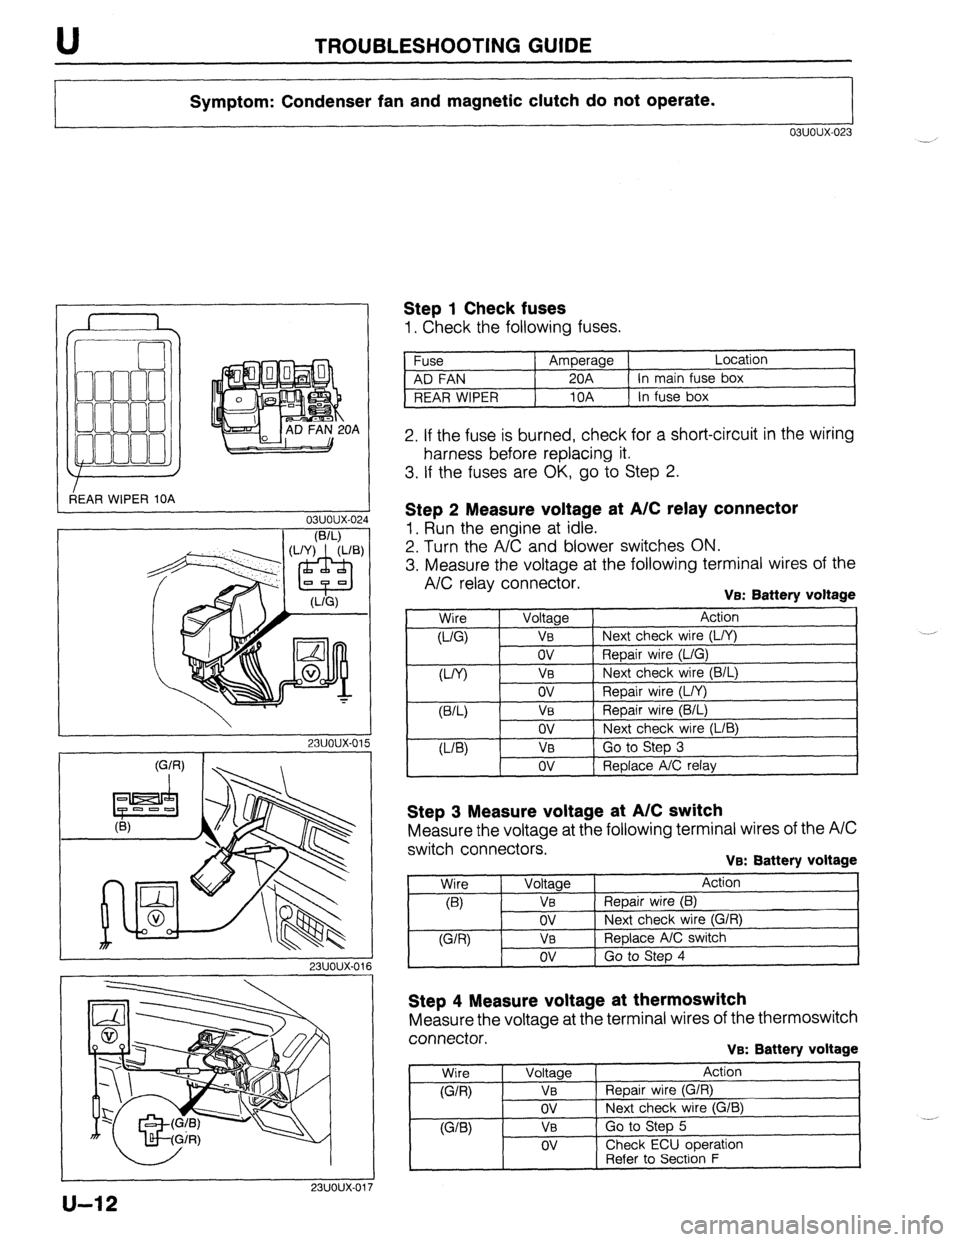 MAZDA PROTEGE 1992  Workshop Manual TROUBLESHOOTING GUIDE 
Symptom: Condenser fan and magnetic clutch do not operate. 
03uoux-023 
r 
3EAR WIPER 10A OA 
L 
03uoux-02. 
I 
1 Step 1 Check fuses 
1. Check the following fuses. 
Fuse Amperag